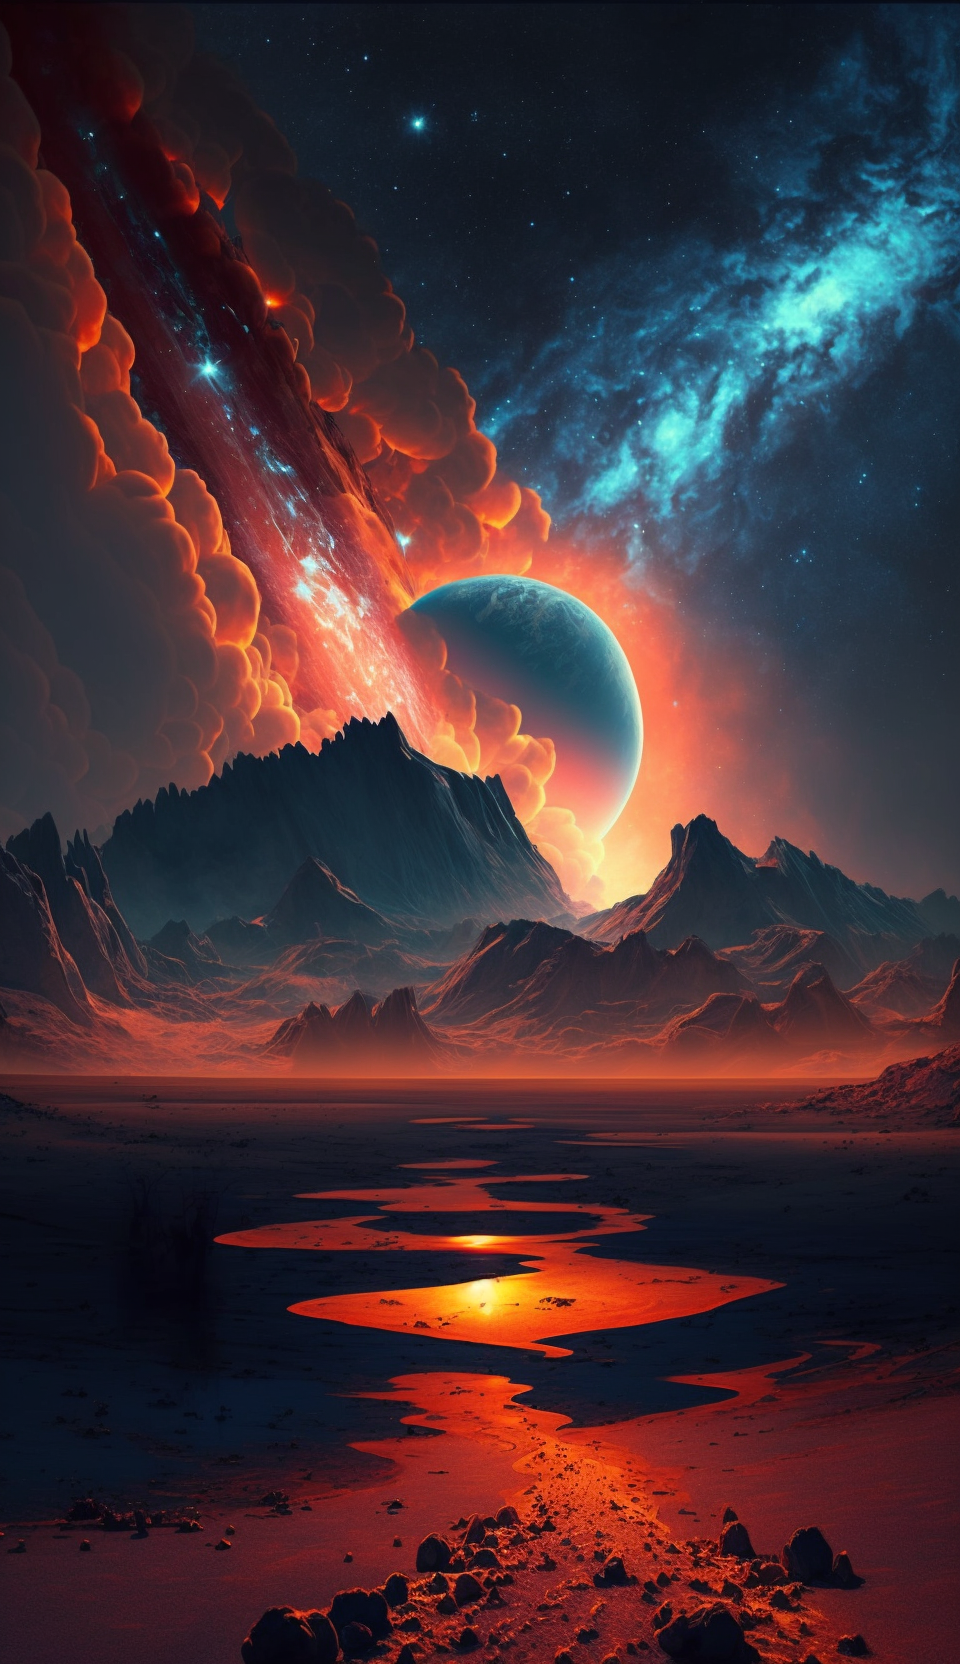 soupcan13_beautiful_stary_sky_on_an_alien_planet_aabea319-04af-470e-95ac-aa2c977f5f17.png